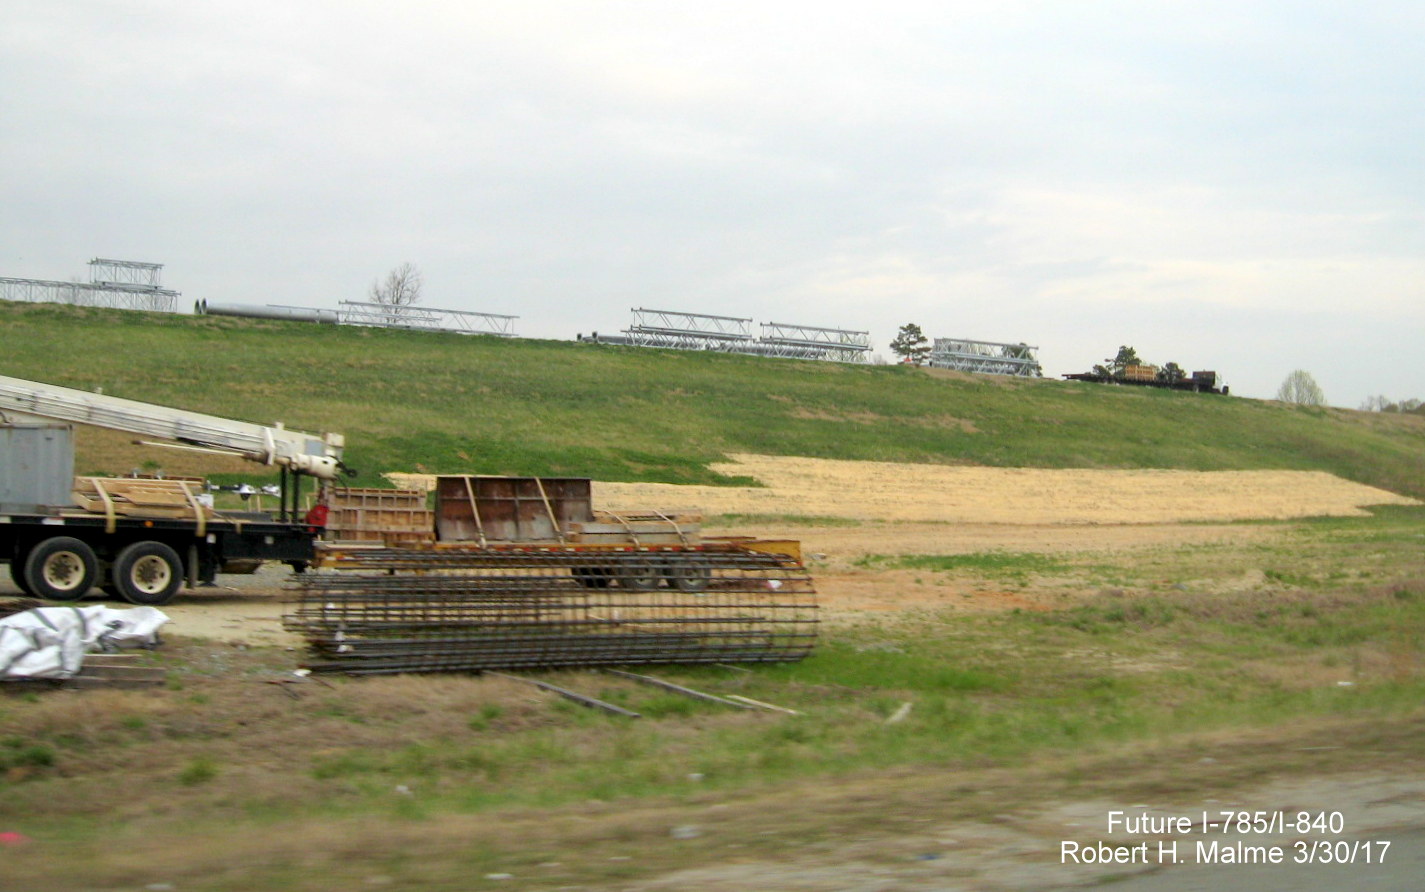 Image of construction at US 70 interchange along the eastern section of the Greensboro Loop